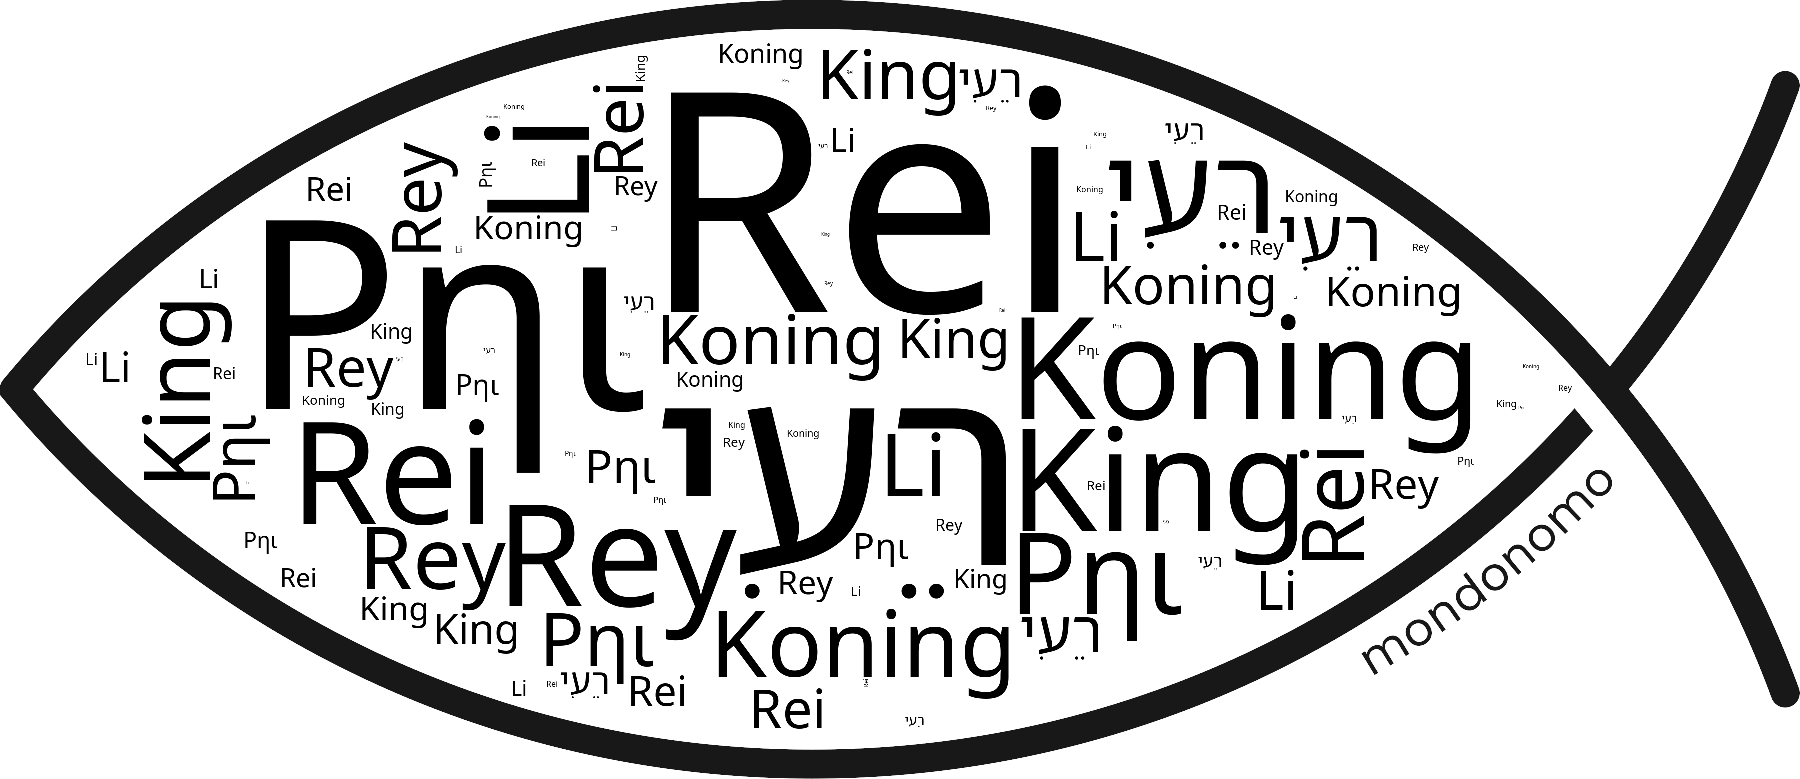 Name Rei in the world's Bibles